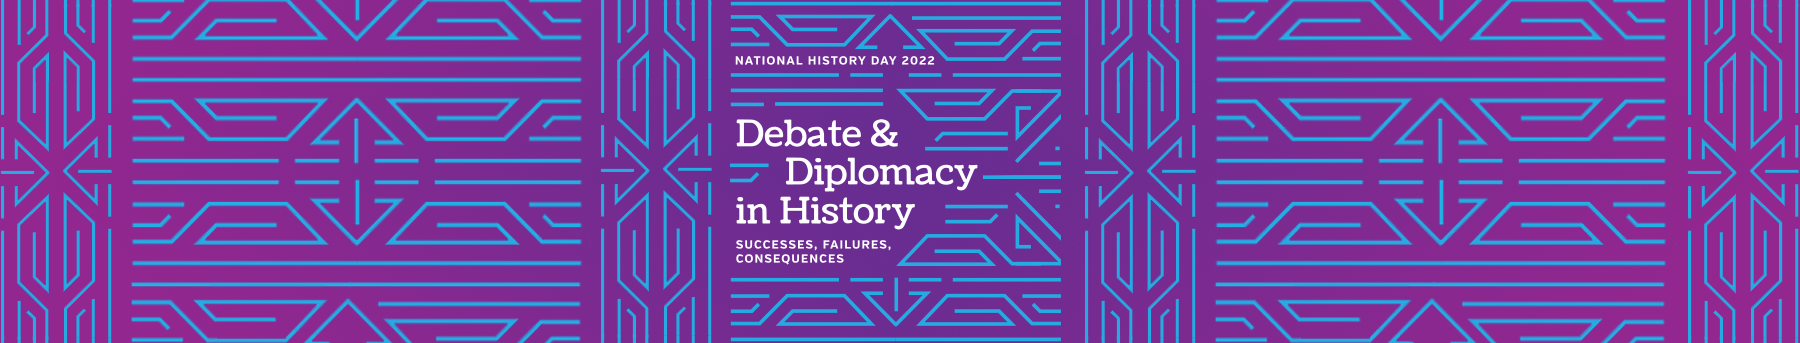 National History Day Banner - Debate and Diplomacy